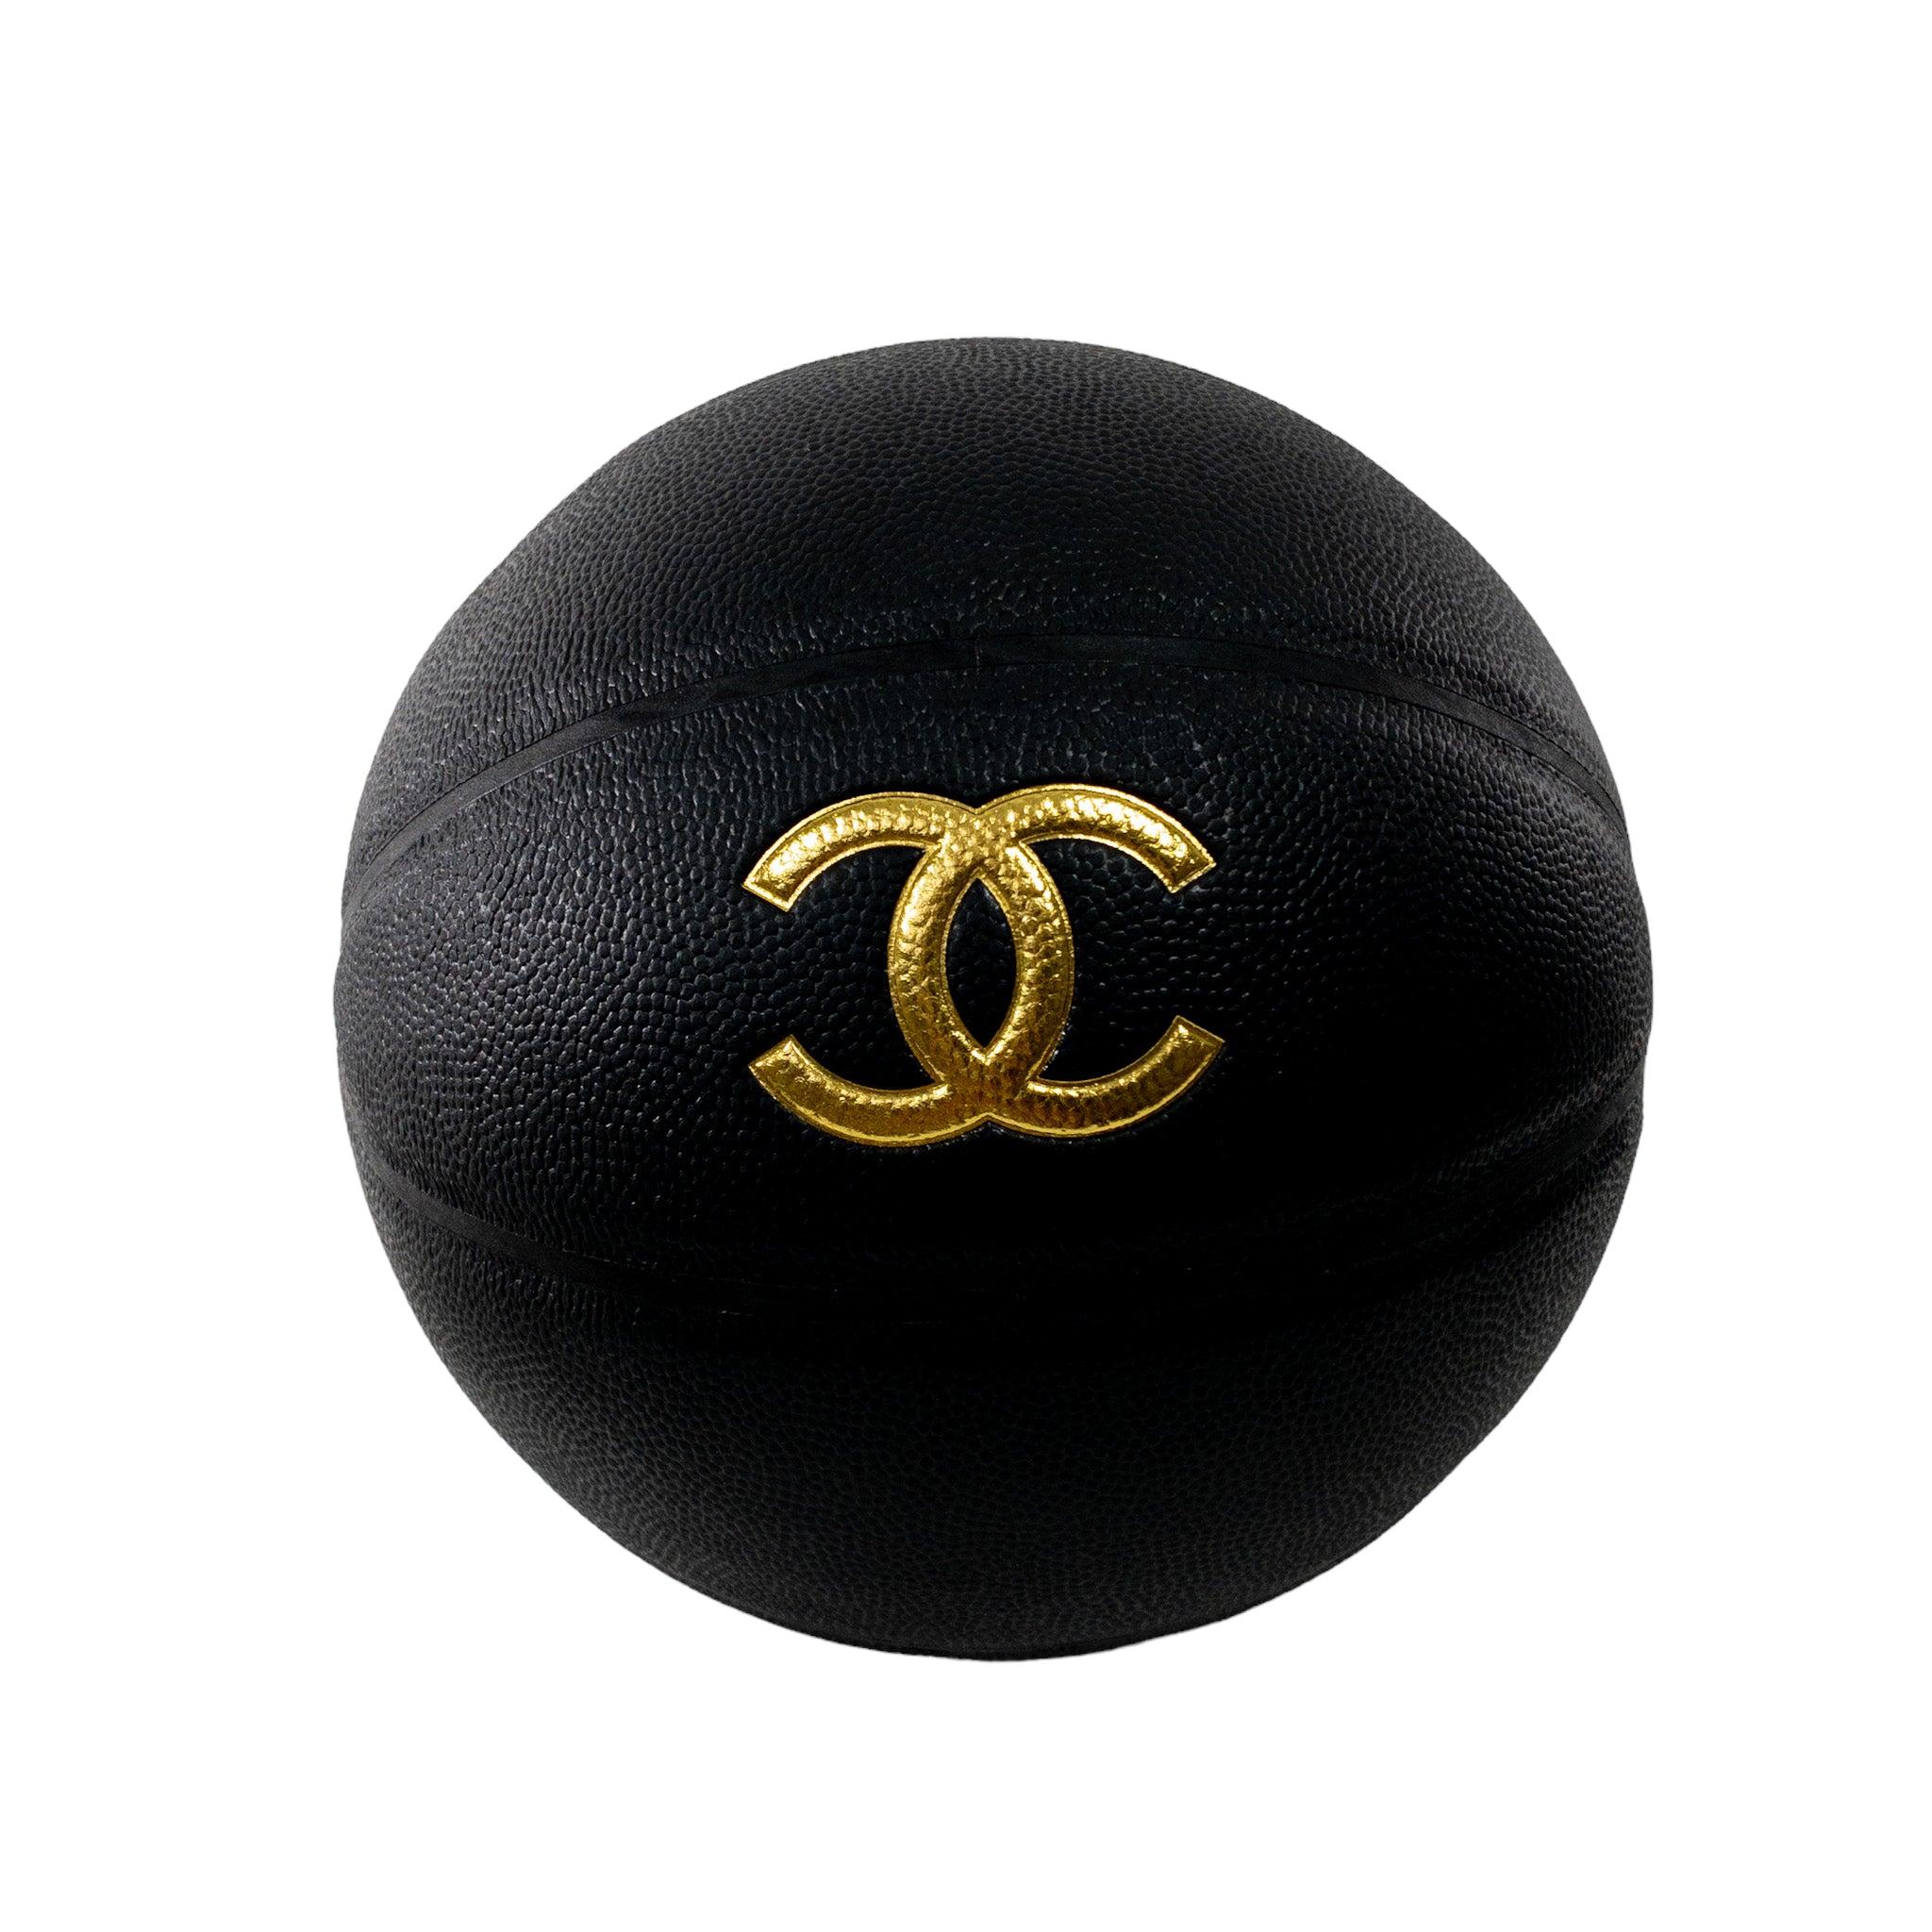 Women's Chanel Limited Edition Basketball with Chain Harness, 2019 For Sale